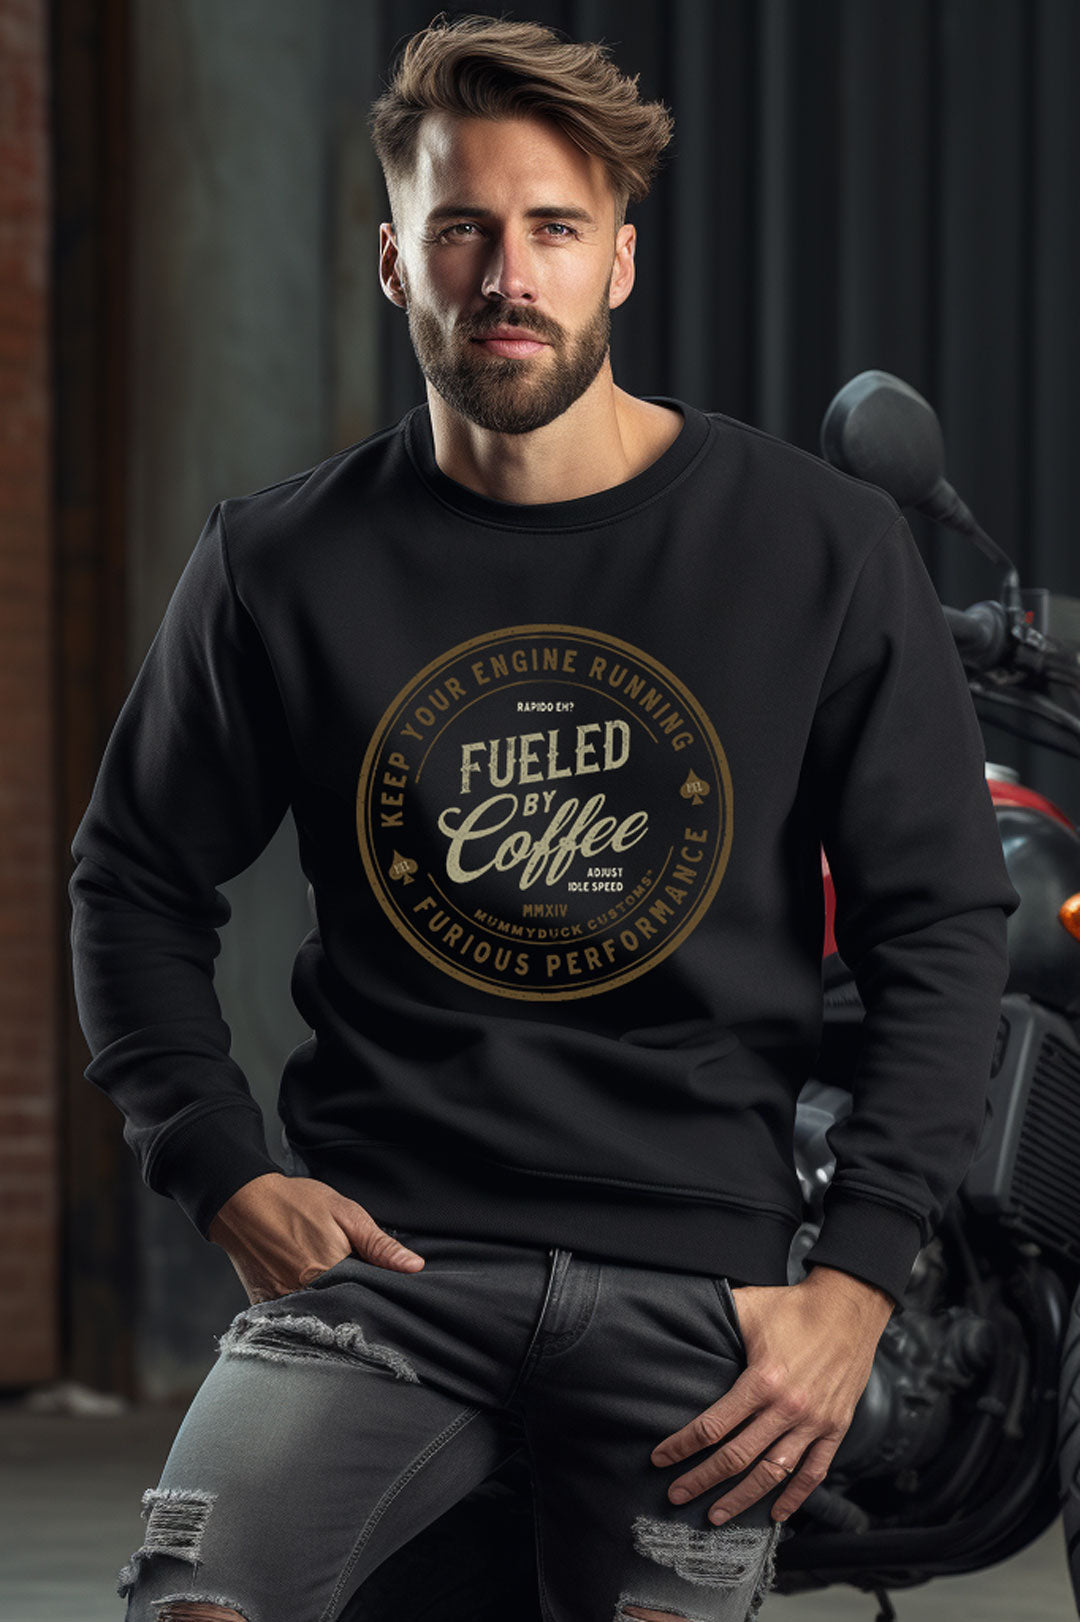 Stay cozy and caffeinated with the Fueled By Coffee Sweatshirt—a vintage coffee shirt perfect for coffee enthusiasts, featuring distinctive style. This Idle Speed Shirt is ideal for those who love the unique blend of coffee and biker fuel in their fashion, including Dad Fuel and Mom Fuel designs.